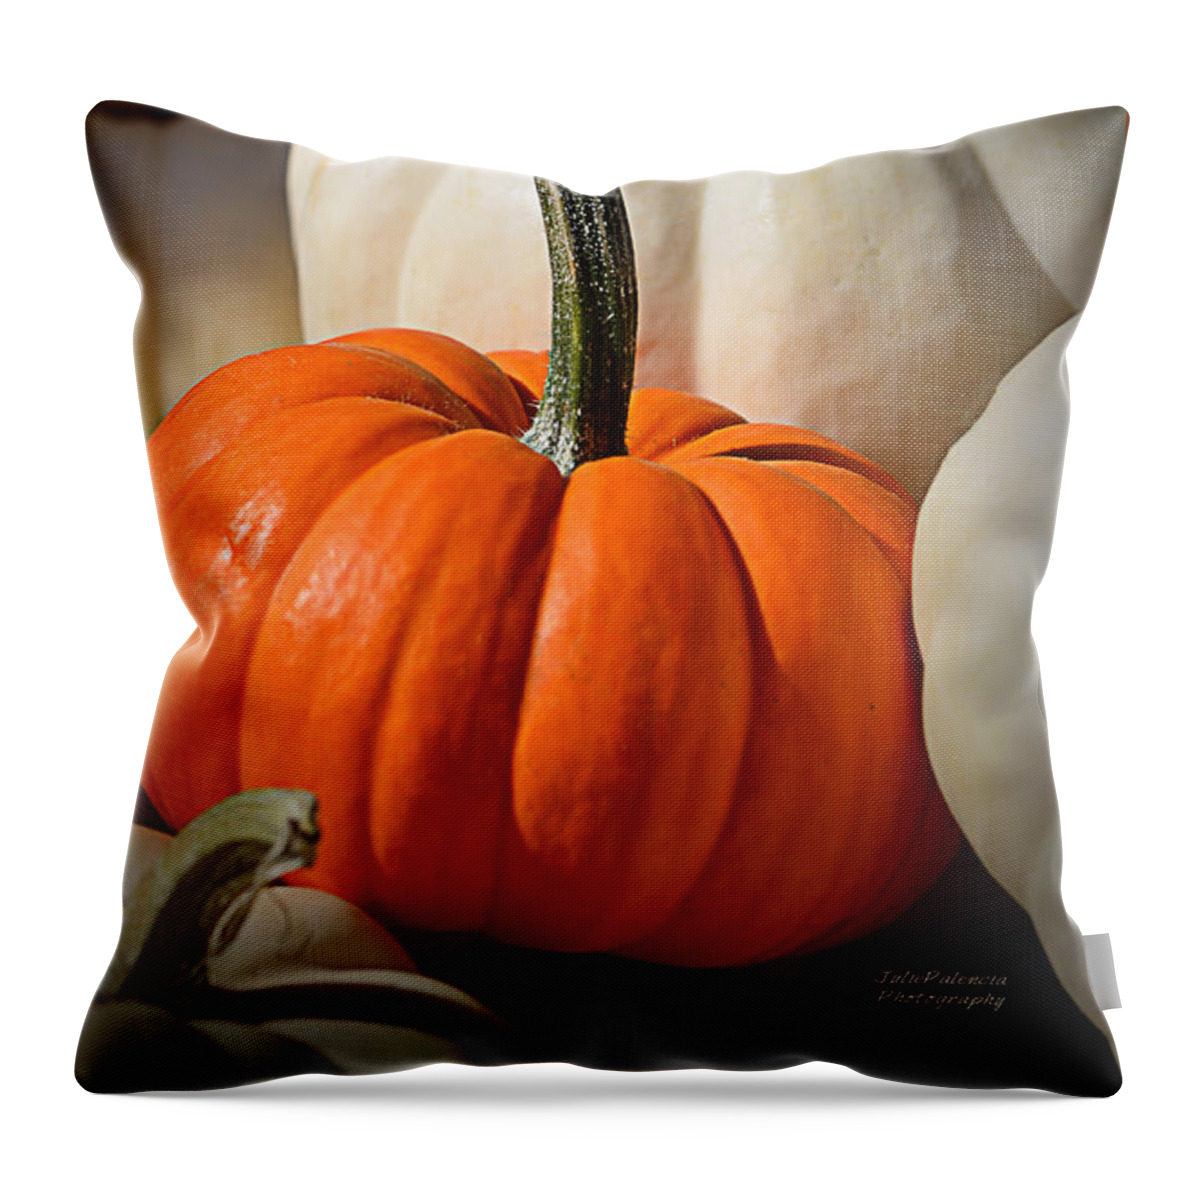 Pumpkins Throw Pillow featuring the photograph Orange and White Pumpkins by Julie Palencia